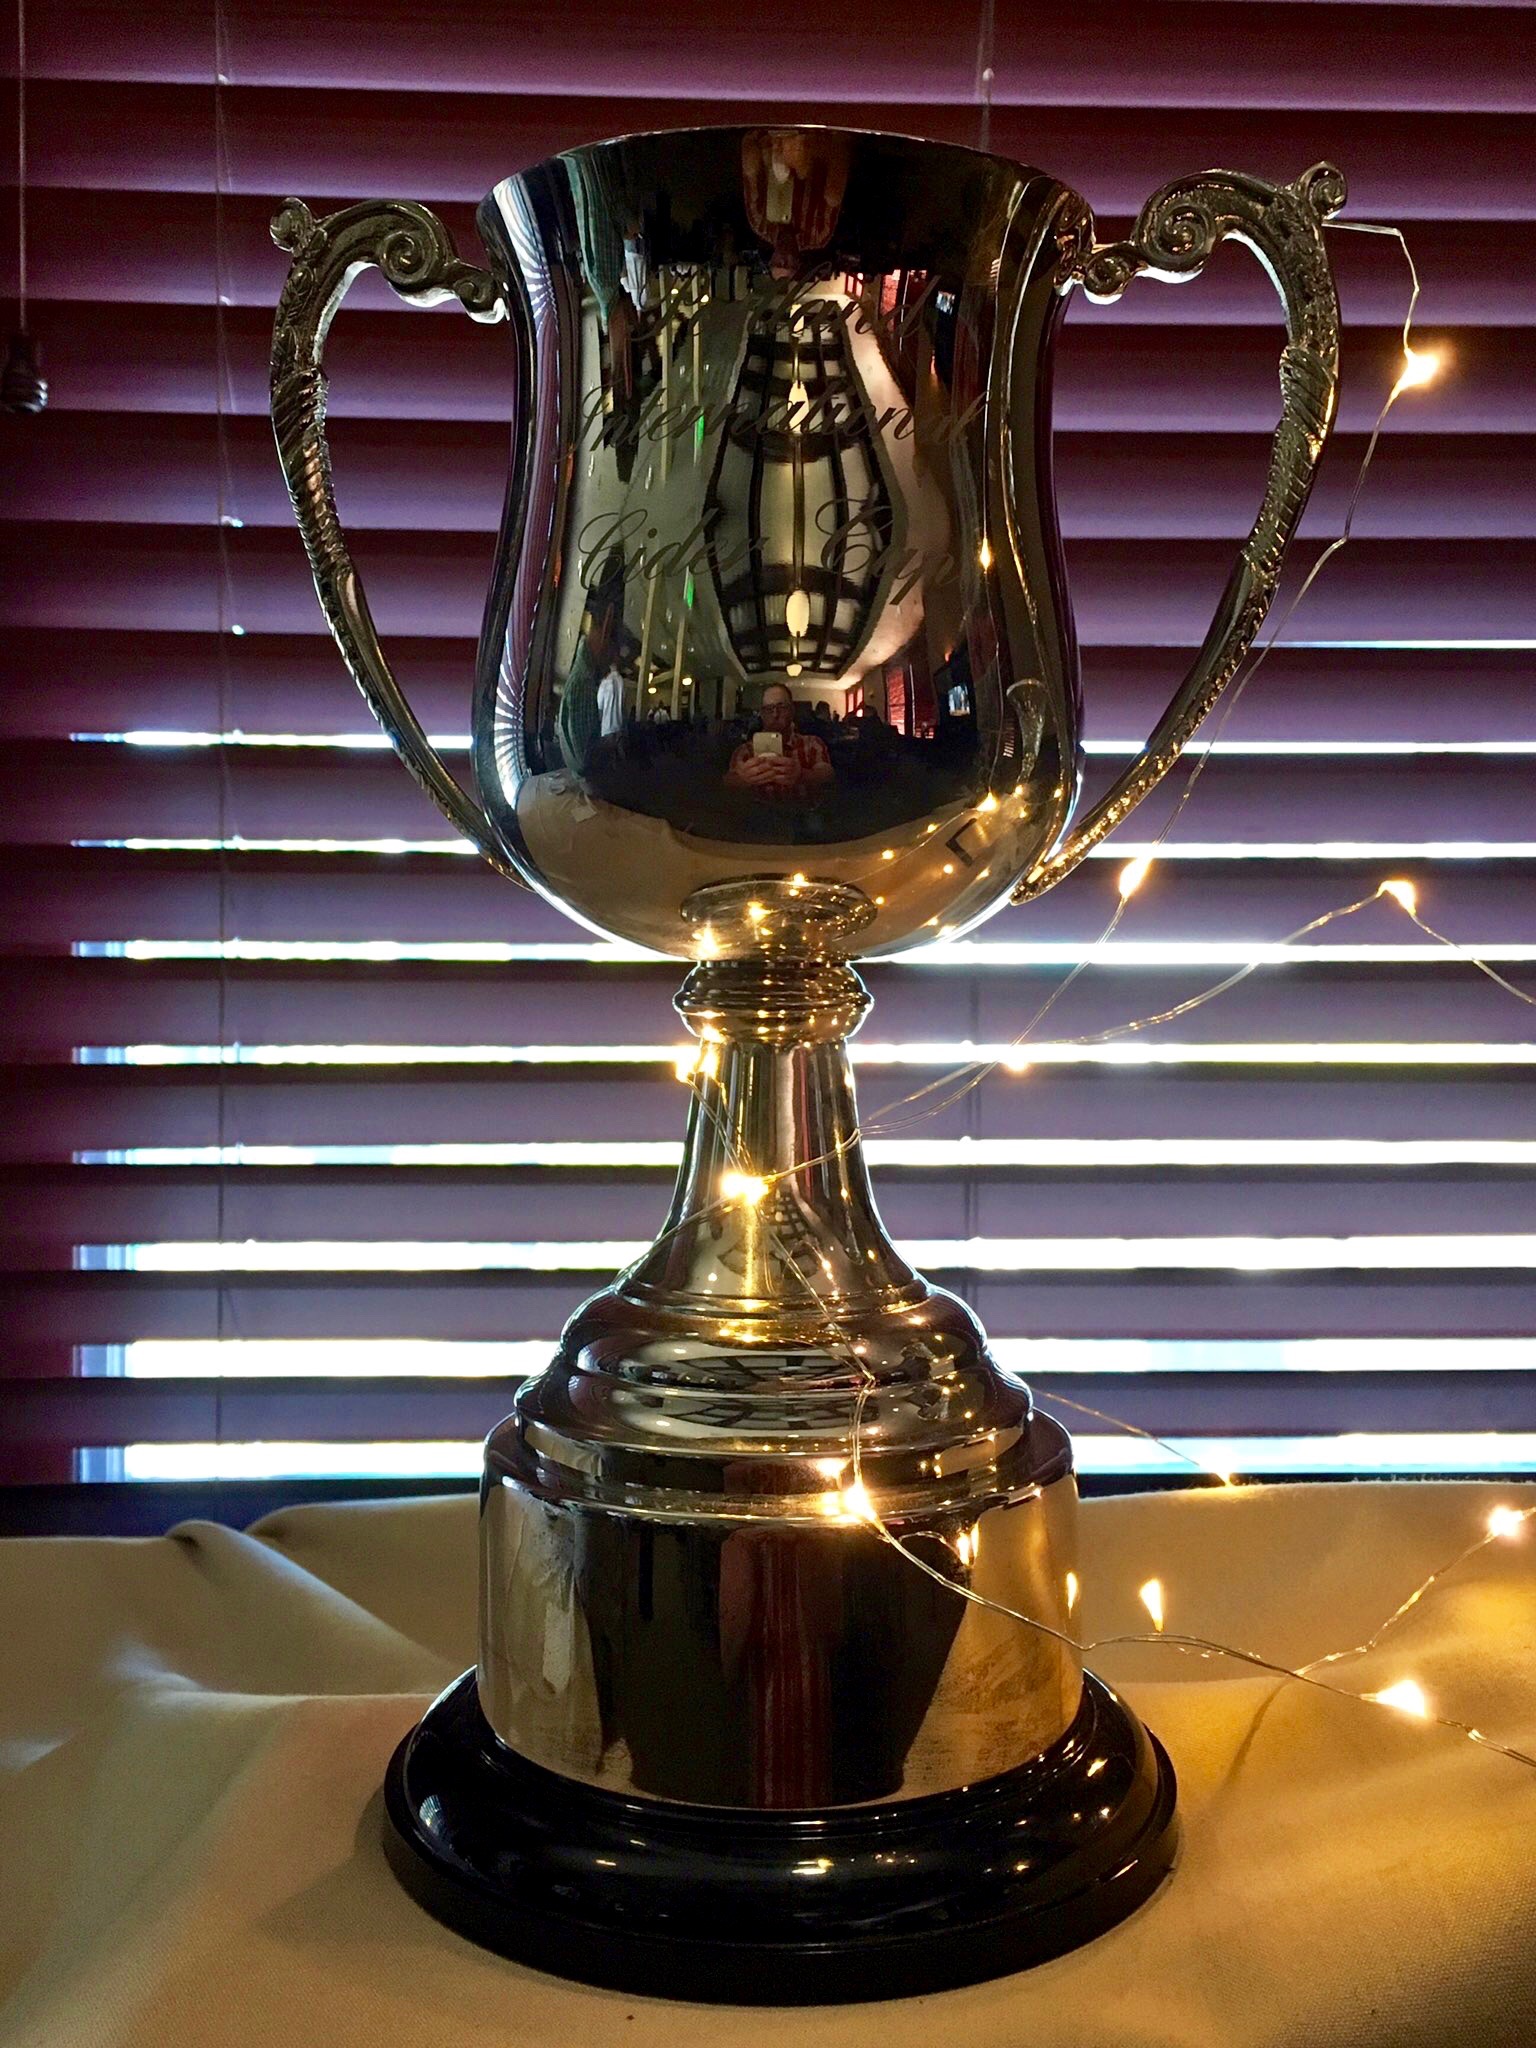 The Portland International Cider Cup on display during the PICC Awards Ceremony.